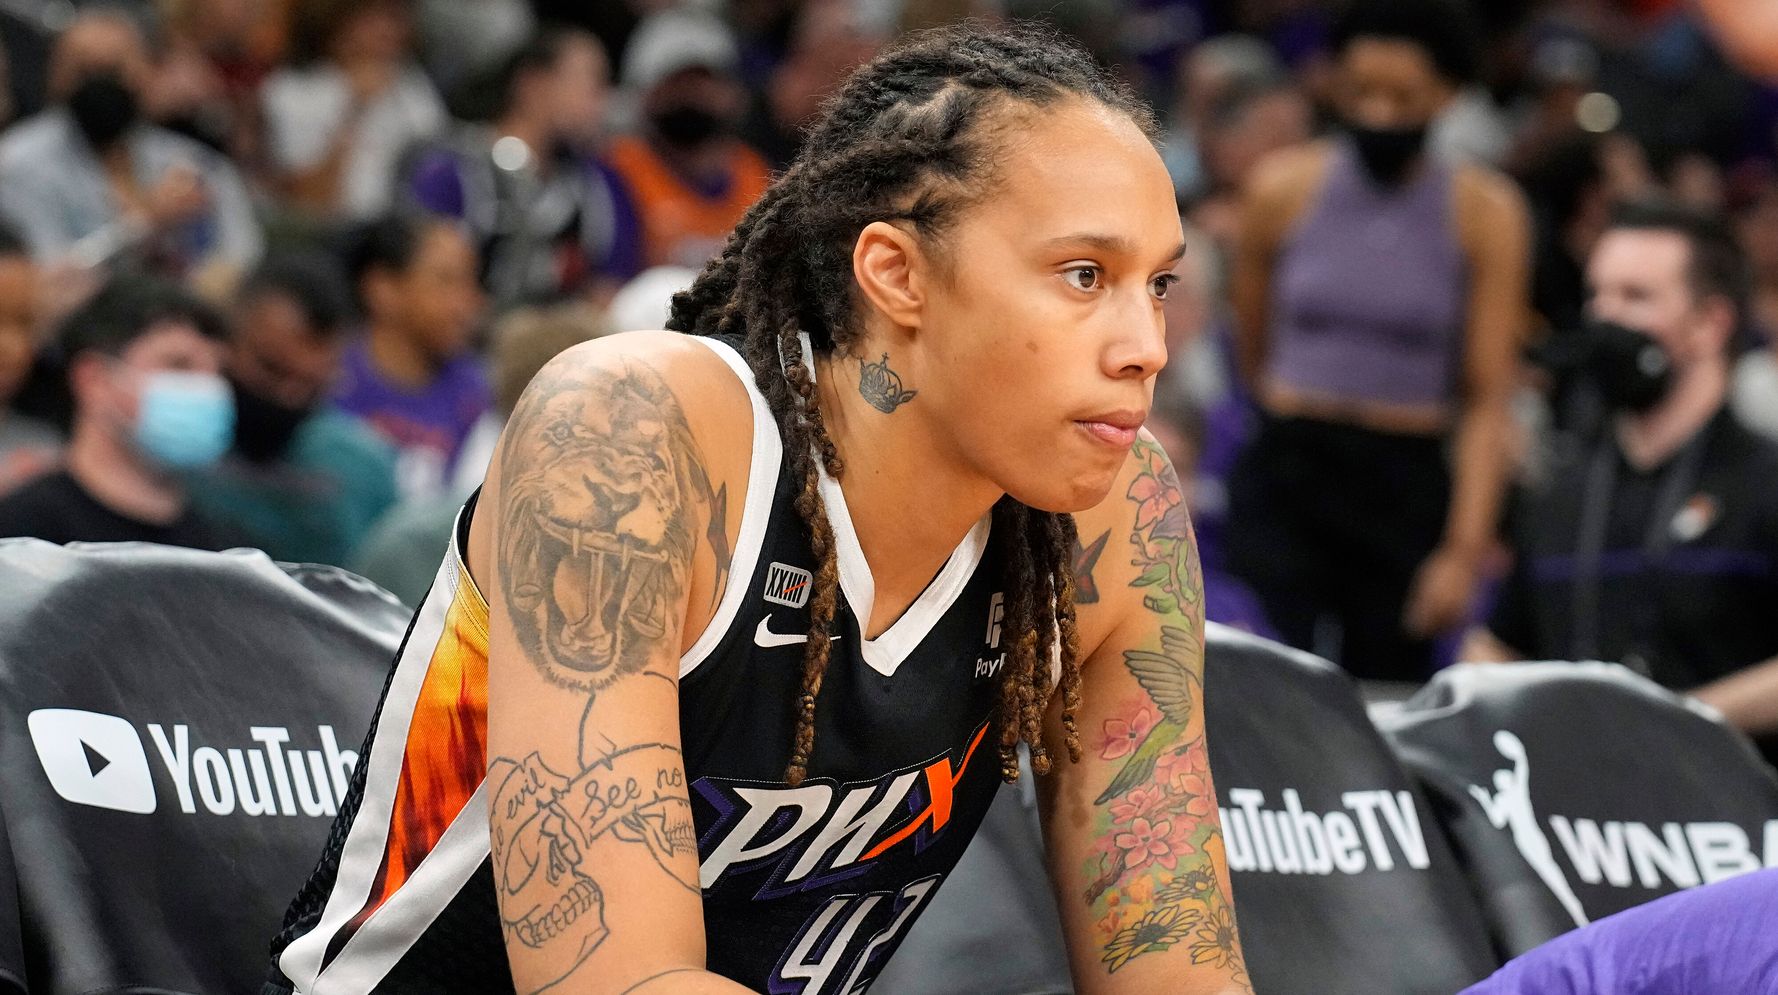 WNBA Basketball Star Brittney Griner Appears In Russian Court Ahead Of Trial